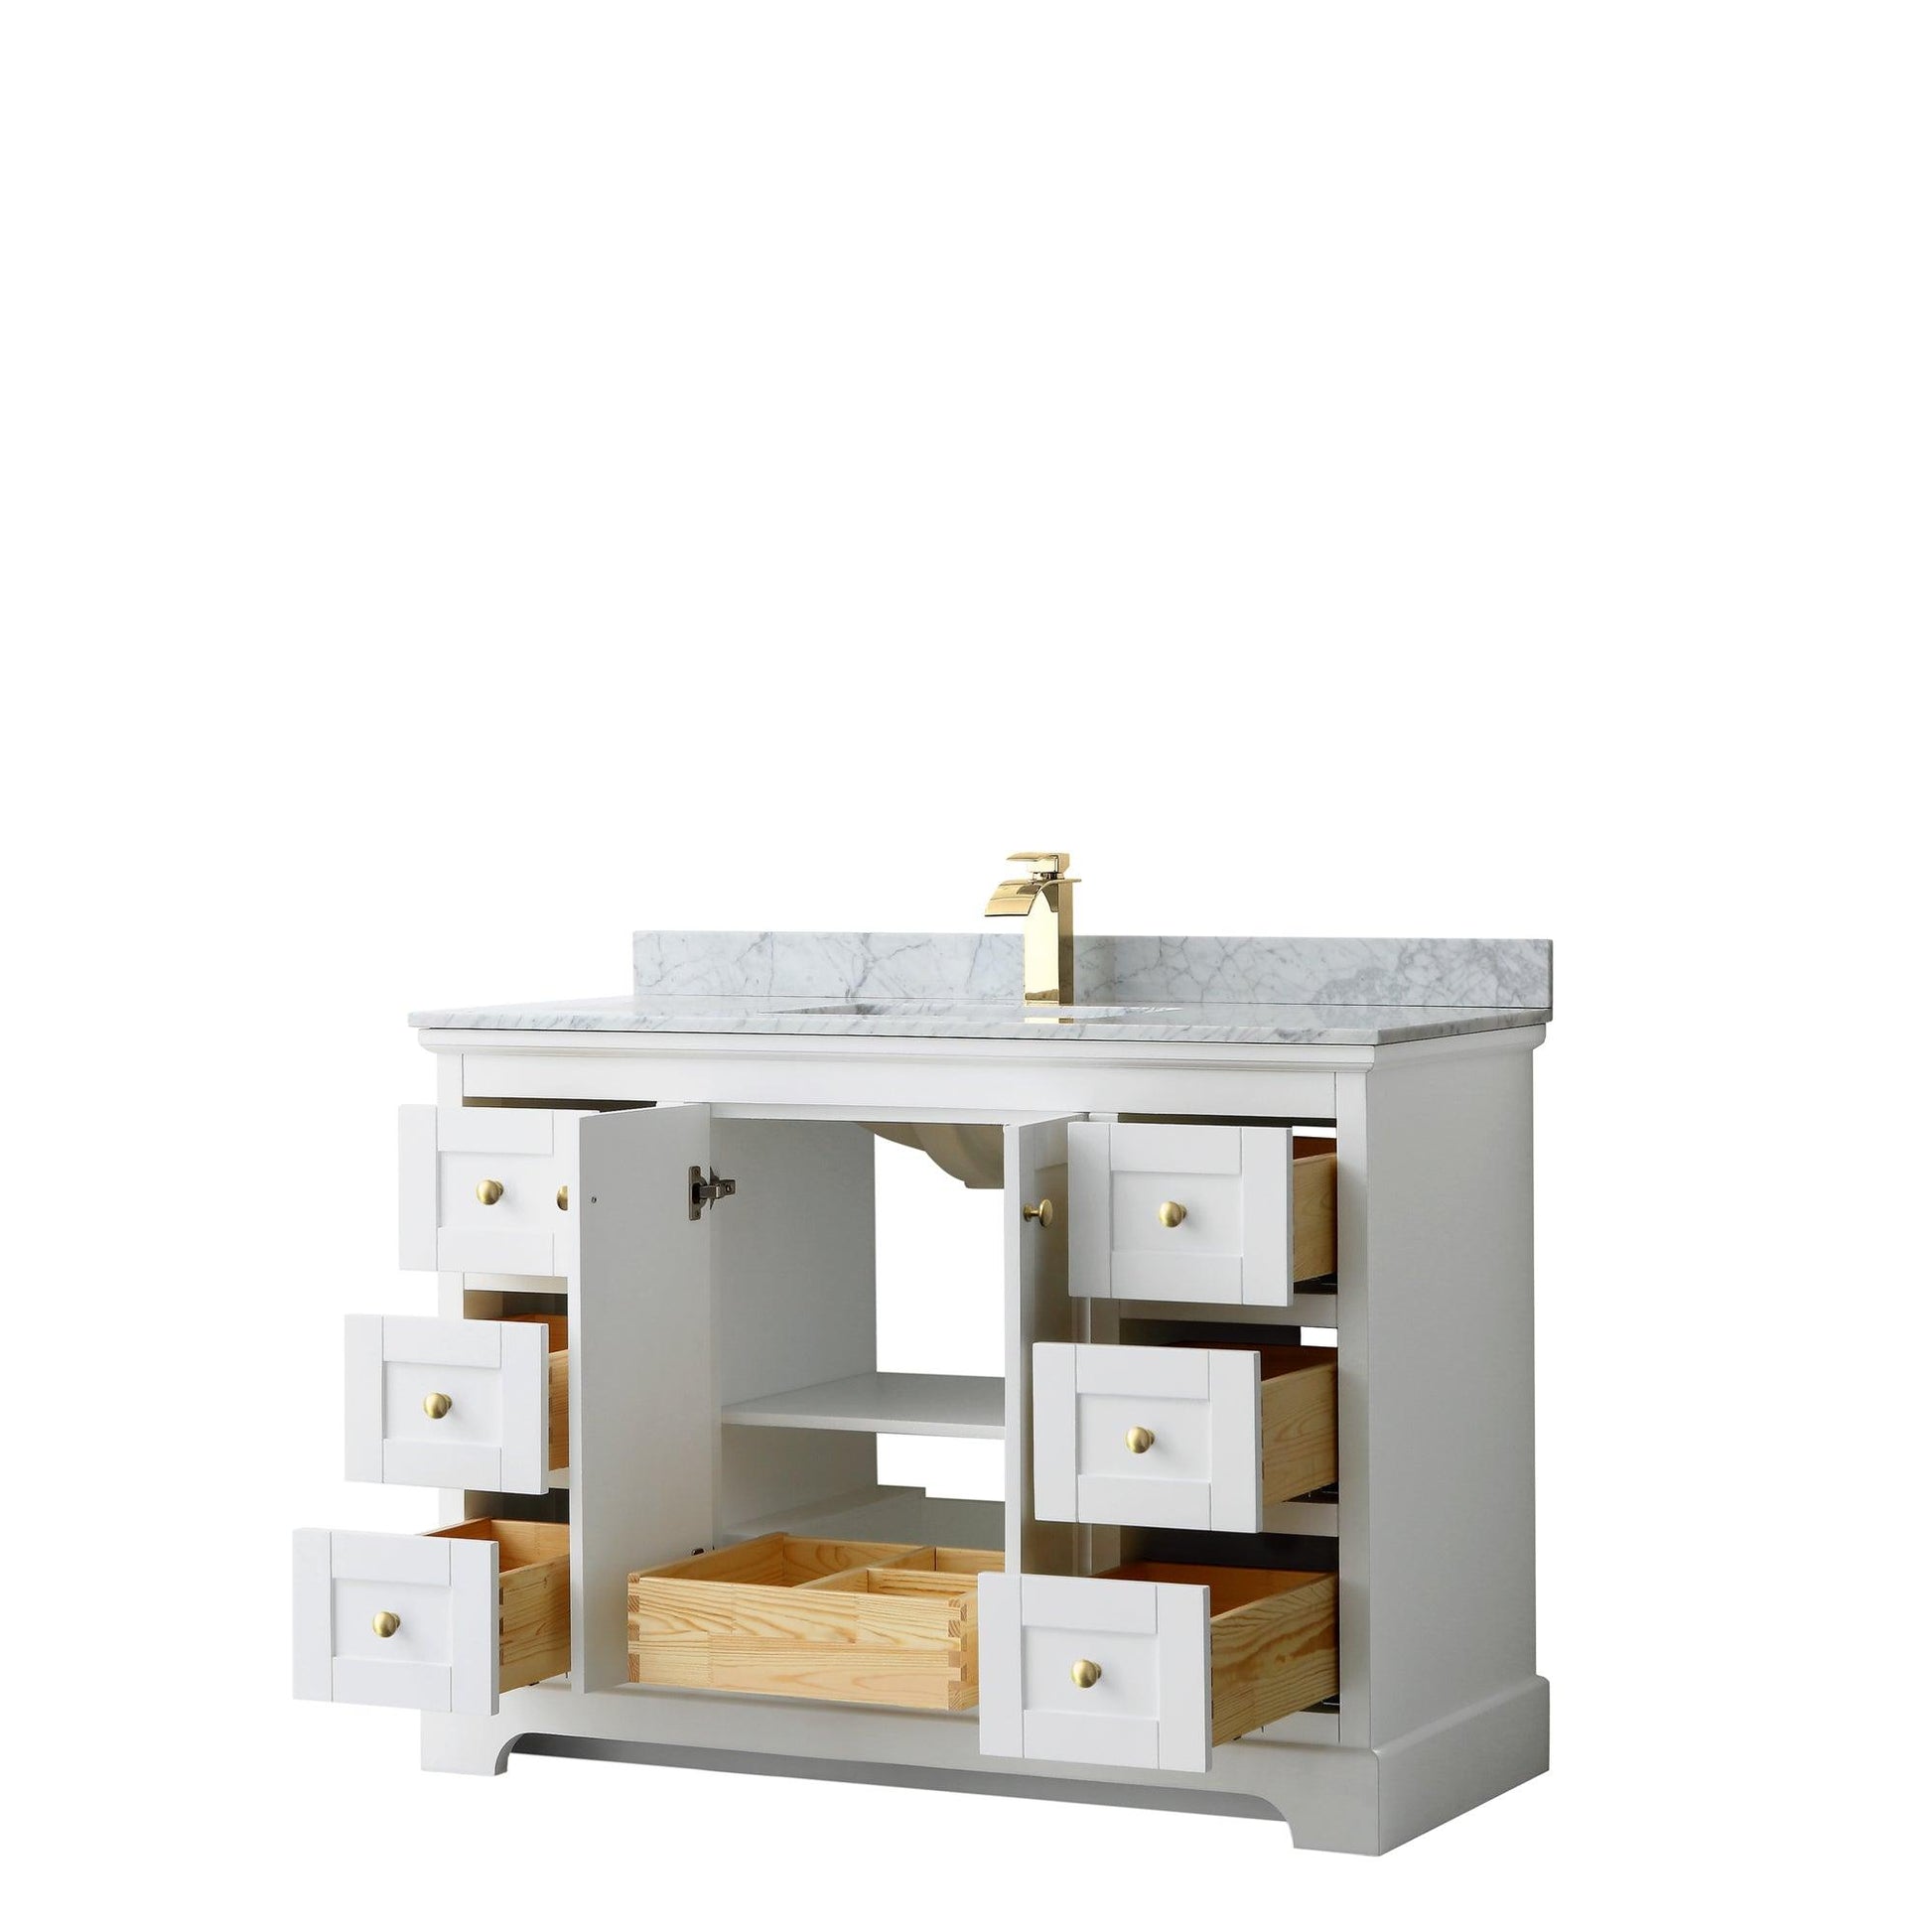 
  
  Wyndham Collection Avery Single Bathroom Vanity in White, White Carrara Marble Countertop, Undermount Square Sink, Optional Mirror, Brushed Gold Trim
  
